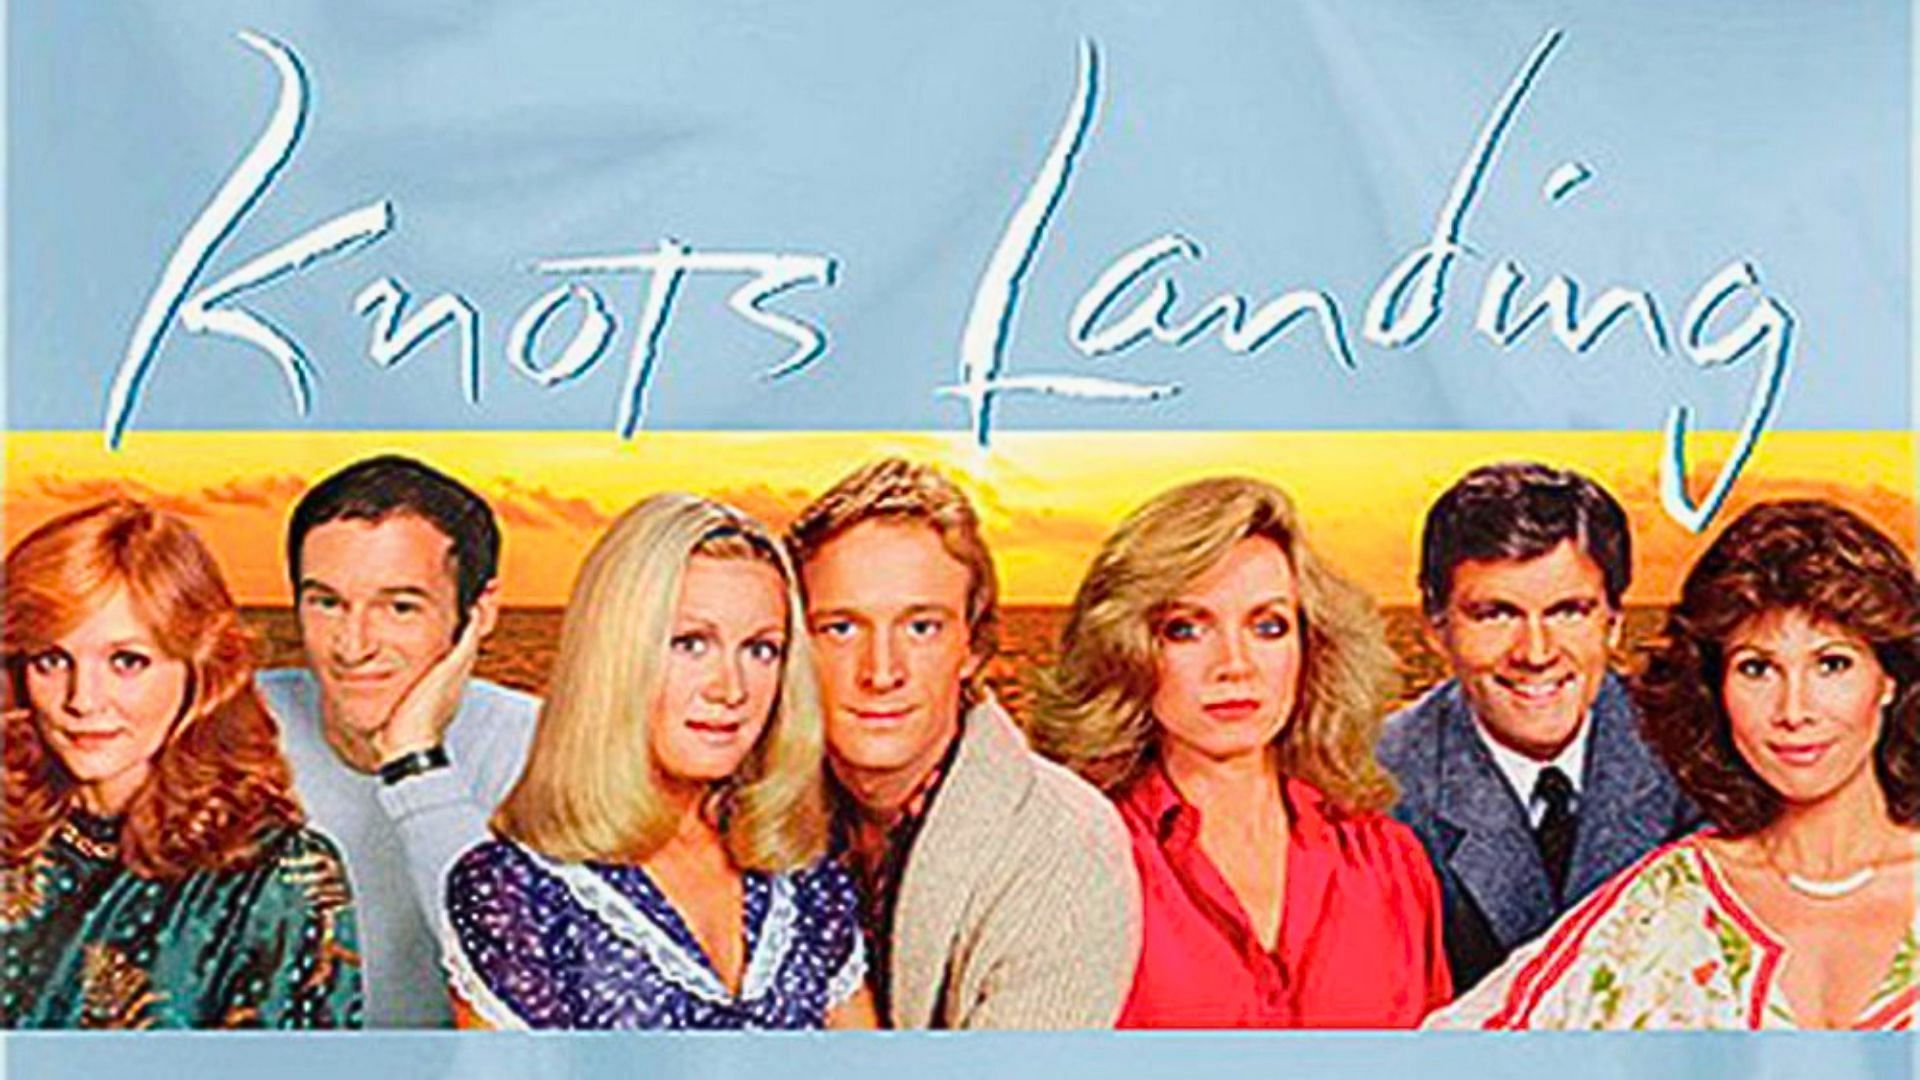 Dale made a guest appearance on Knots Landing (Images via CBS)